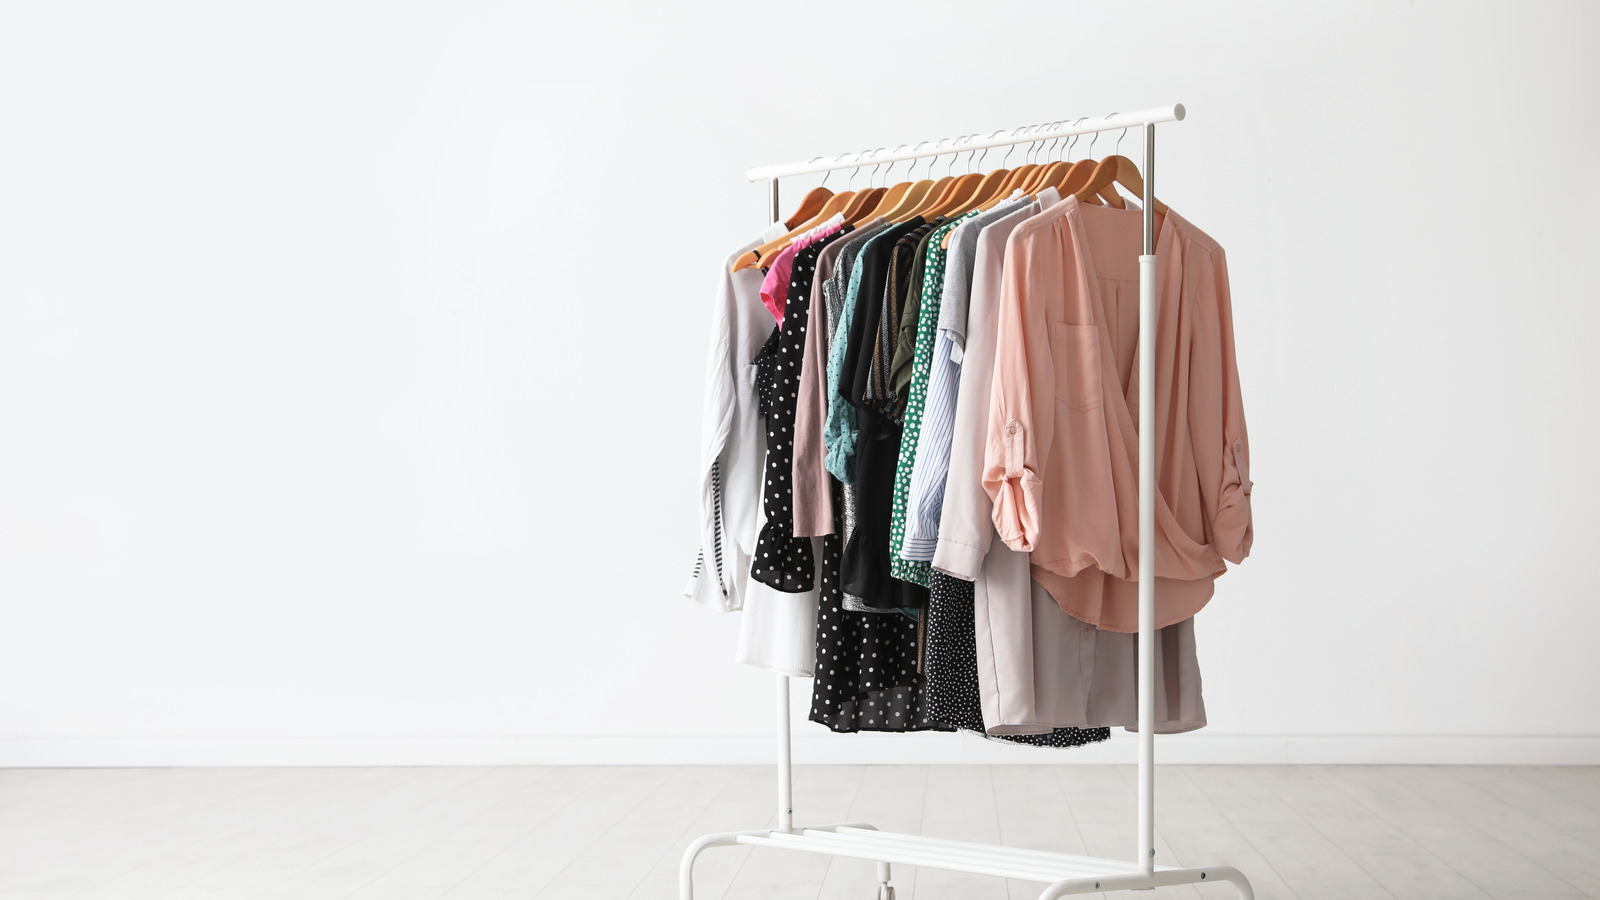 Why You Should Stop Using Wire Clothes Hangers Immediately